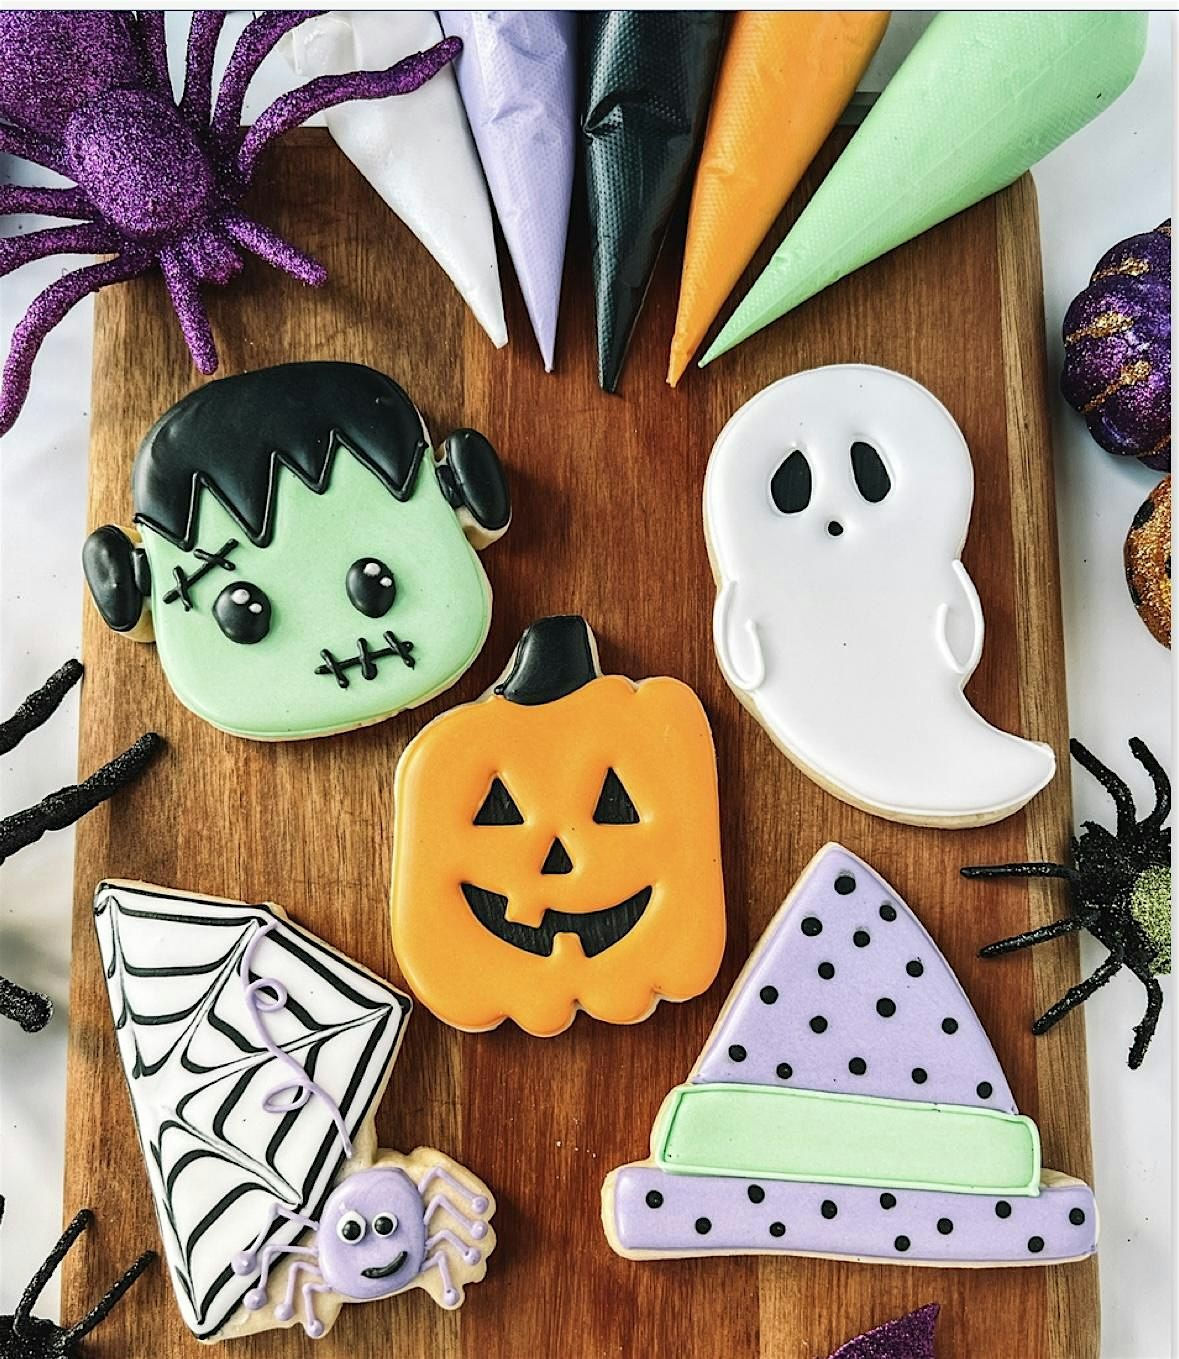 Frightfully Fun Sugar Cookie Decorating Class - Threes of Cups Winery